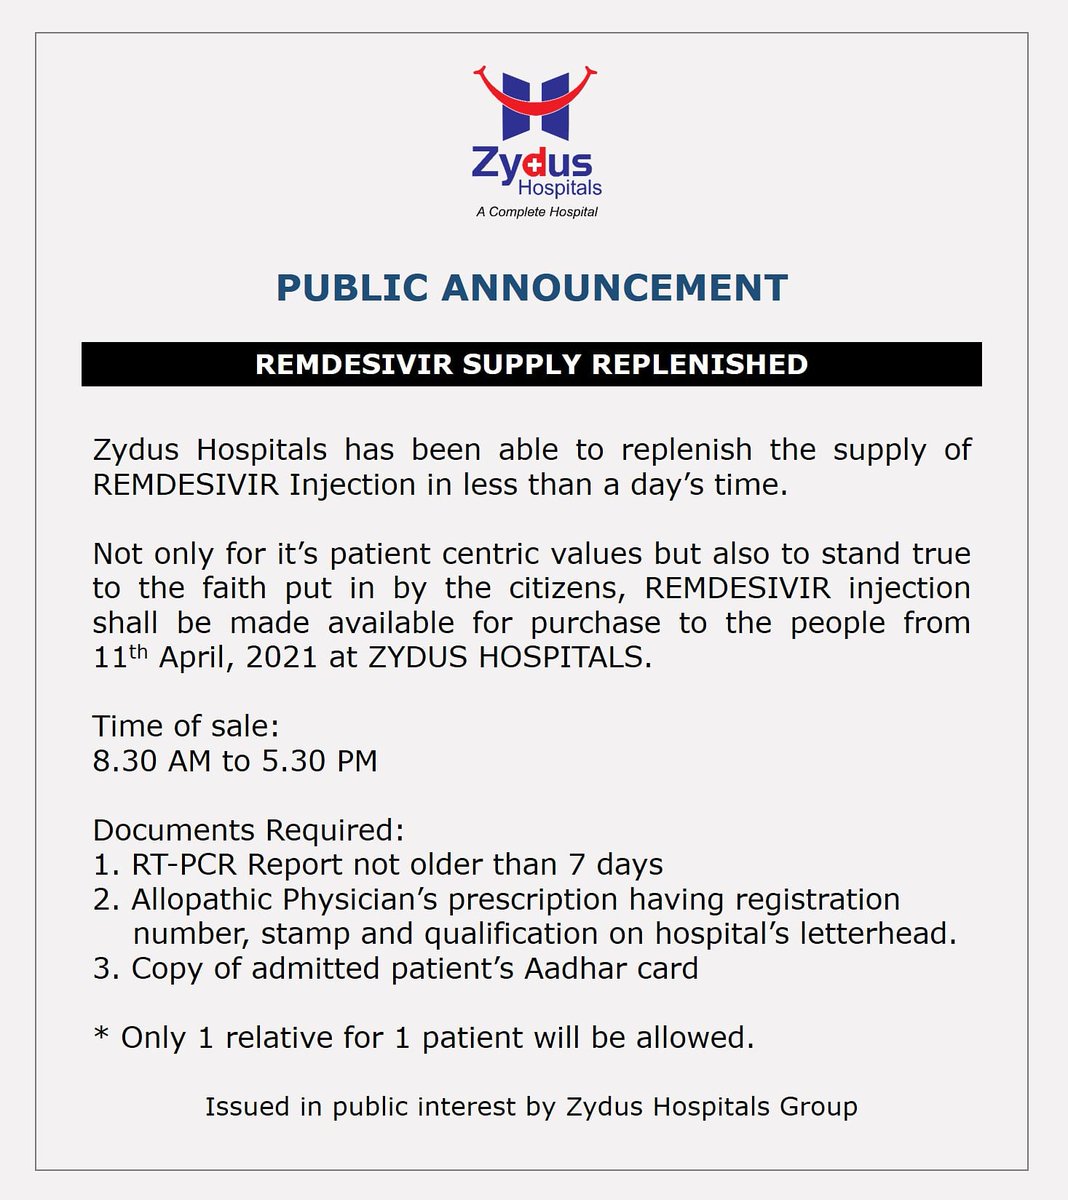 With more zest and preparations, Zydus Hospitals announces stock replenishment of #REMDAC #Remdesivir from #ZydusCadila.

Kindly be patient as you join the queue for Remdesivir at Zydus Hospitals.

#COVID19 #COVID19management #COVID19medication #Pandemic #ZydusHospitals https://t.co/gB0W7wsXw5